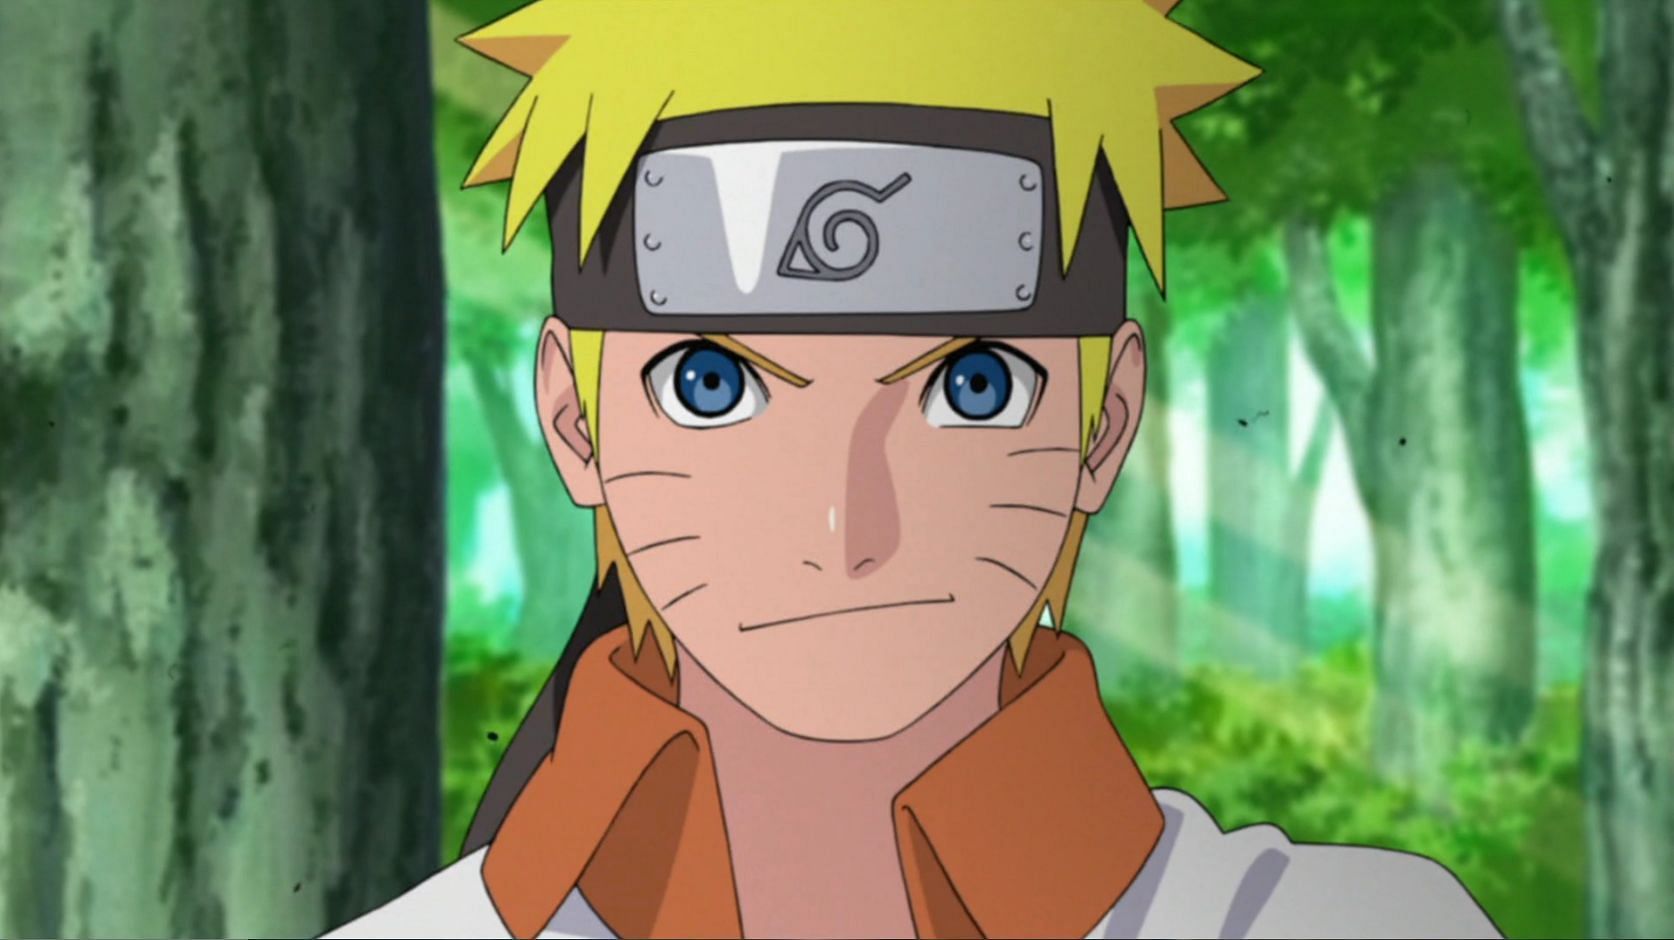 Naruto as shown in the anime (Image via Pierrot)